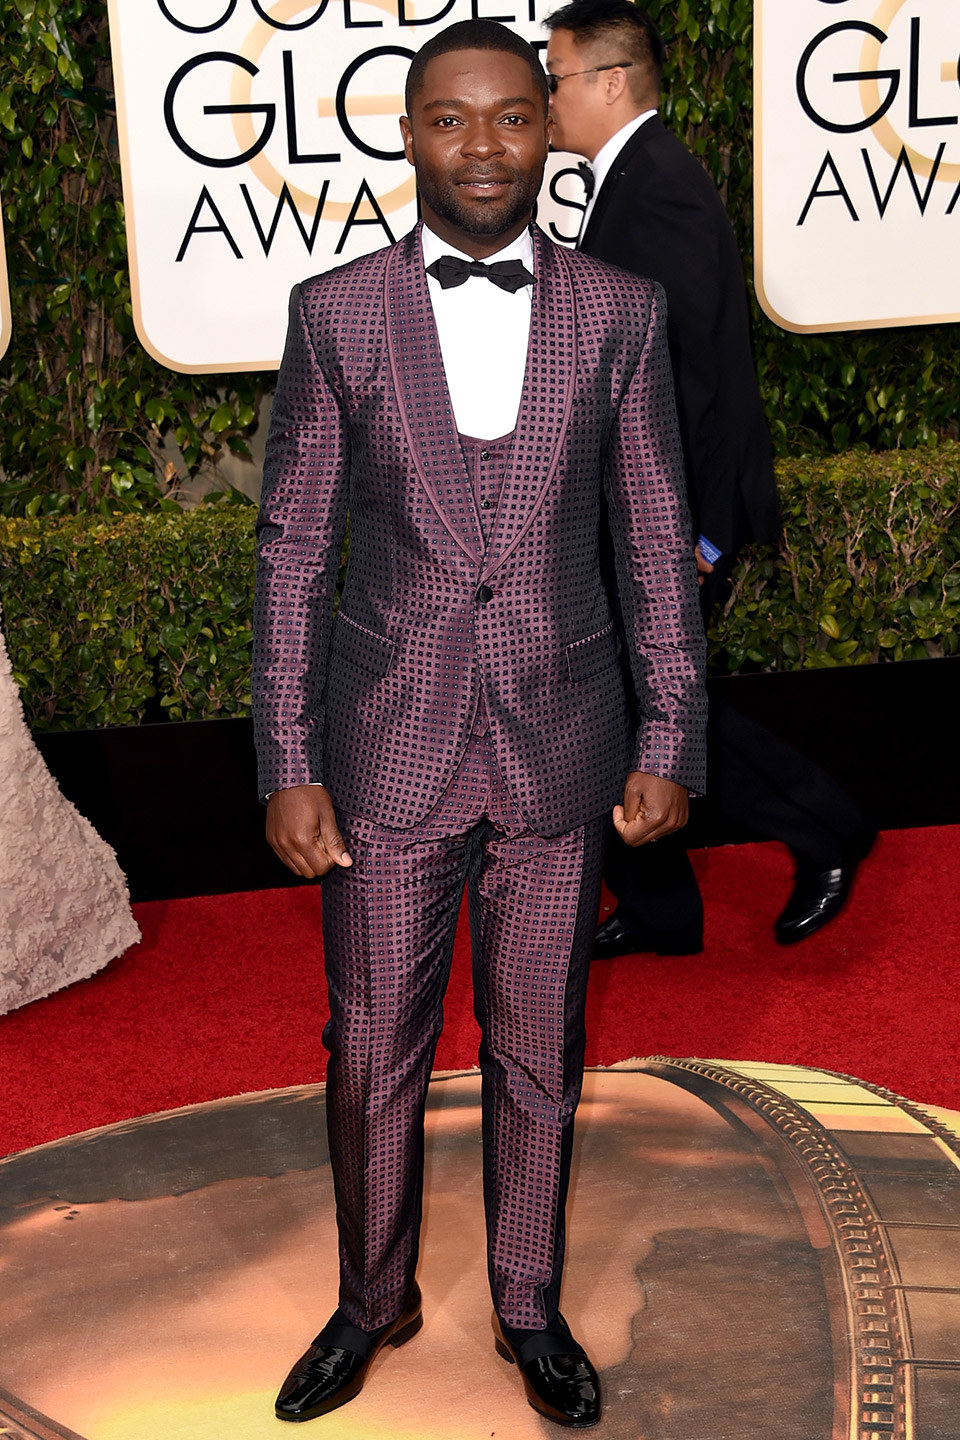 David Oyelowo is no stranger to bold looks and pulled off purple, wearing this Dolce & Gabana suit. 